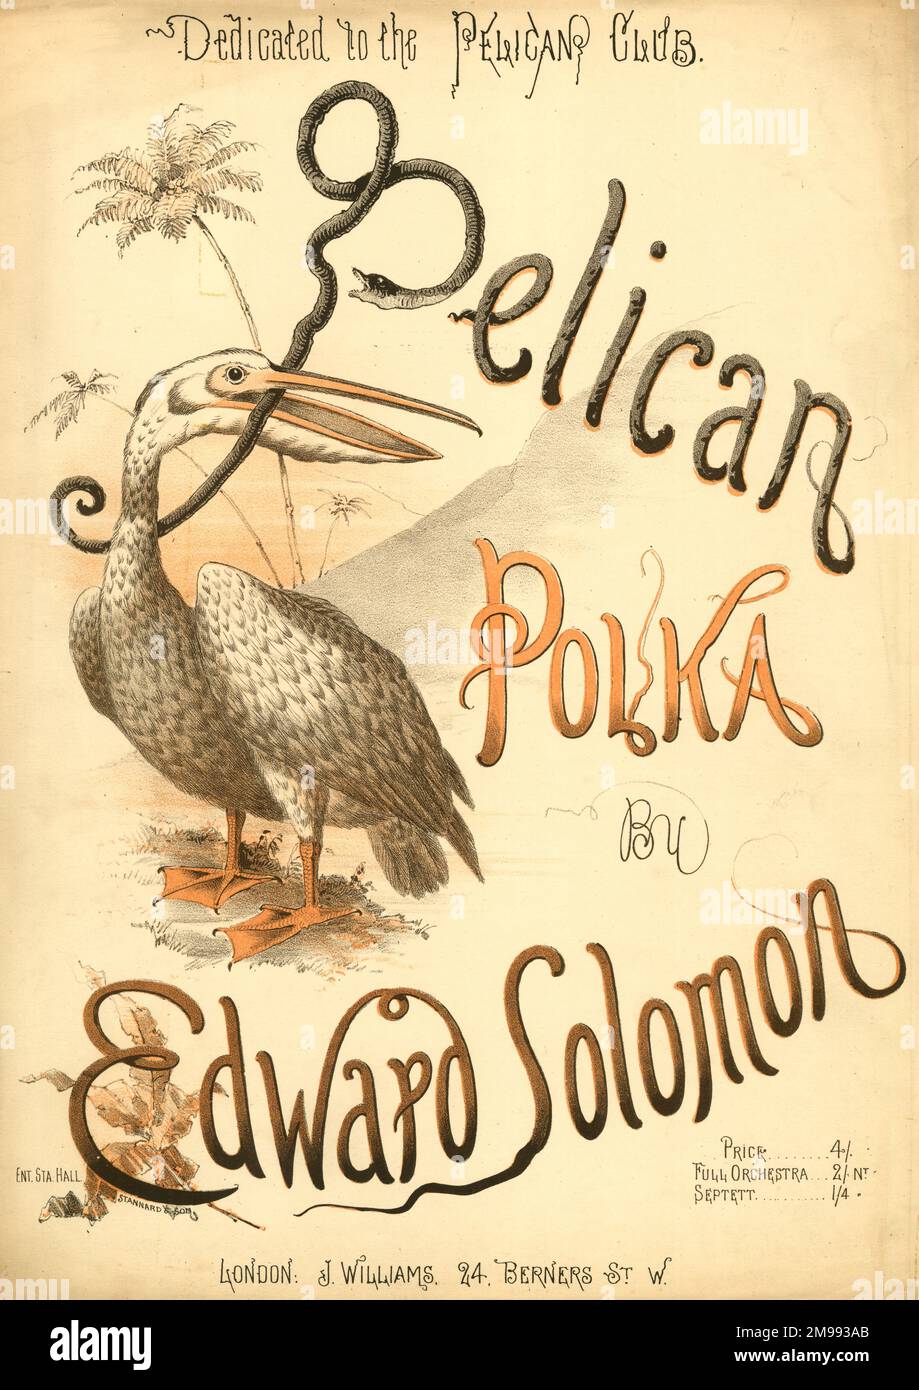 Music cover, Pelican Polka by Edward Solomon, dedicated to the Pelican Club. Stock Photo